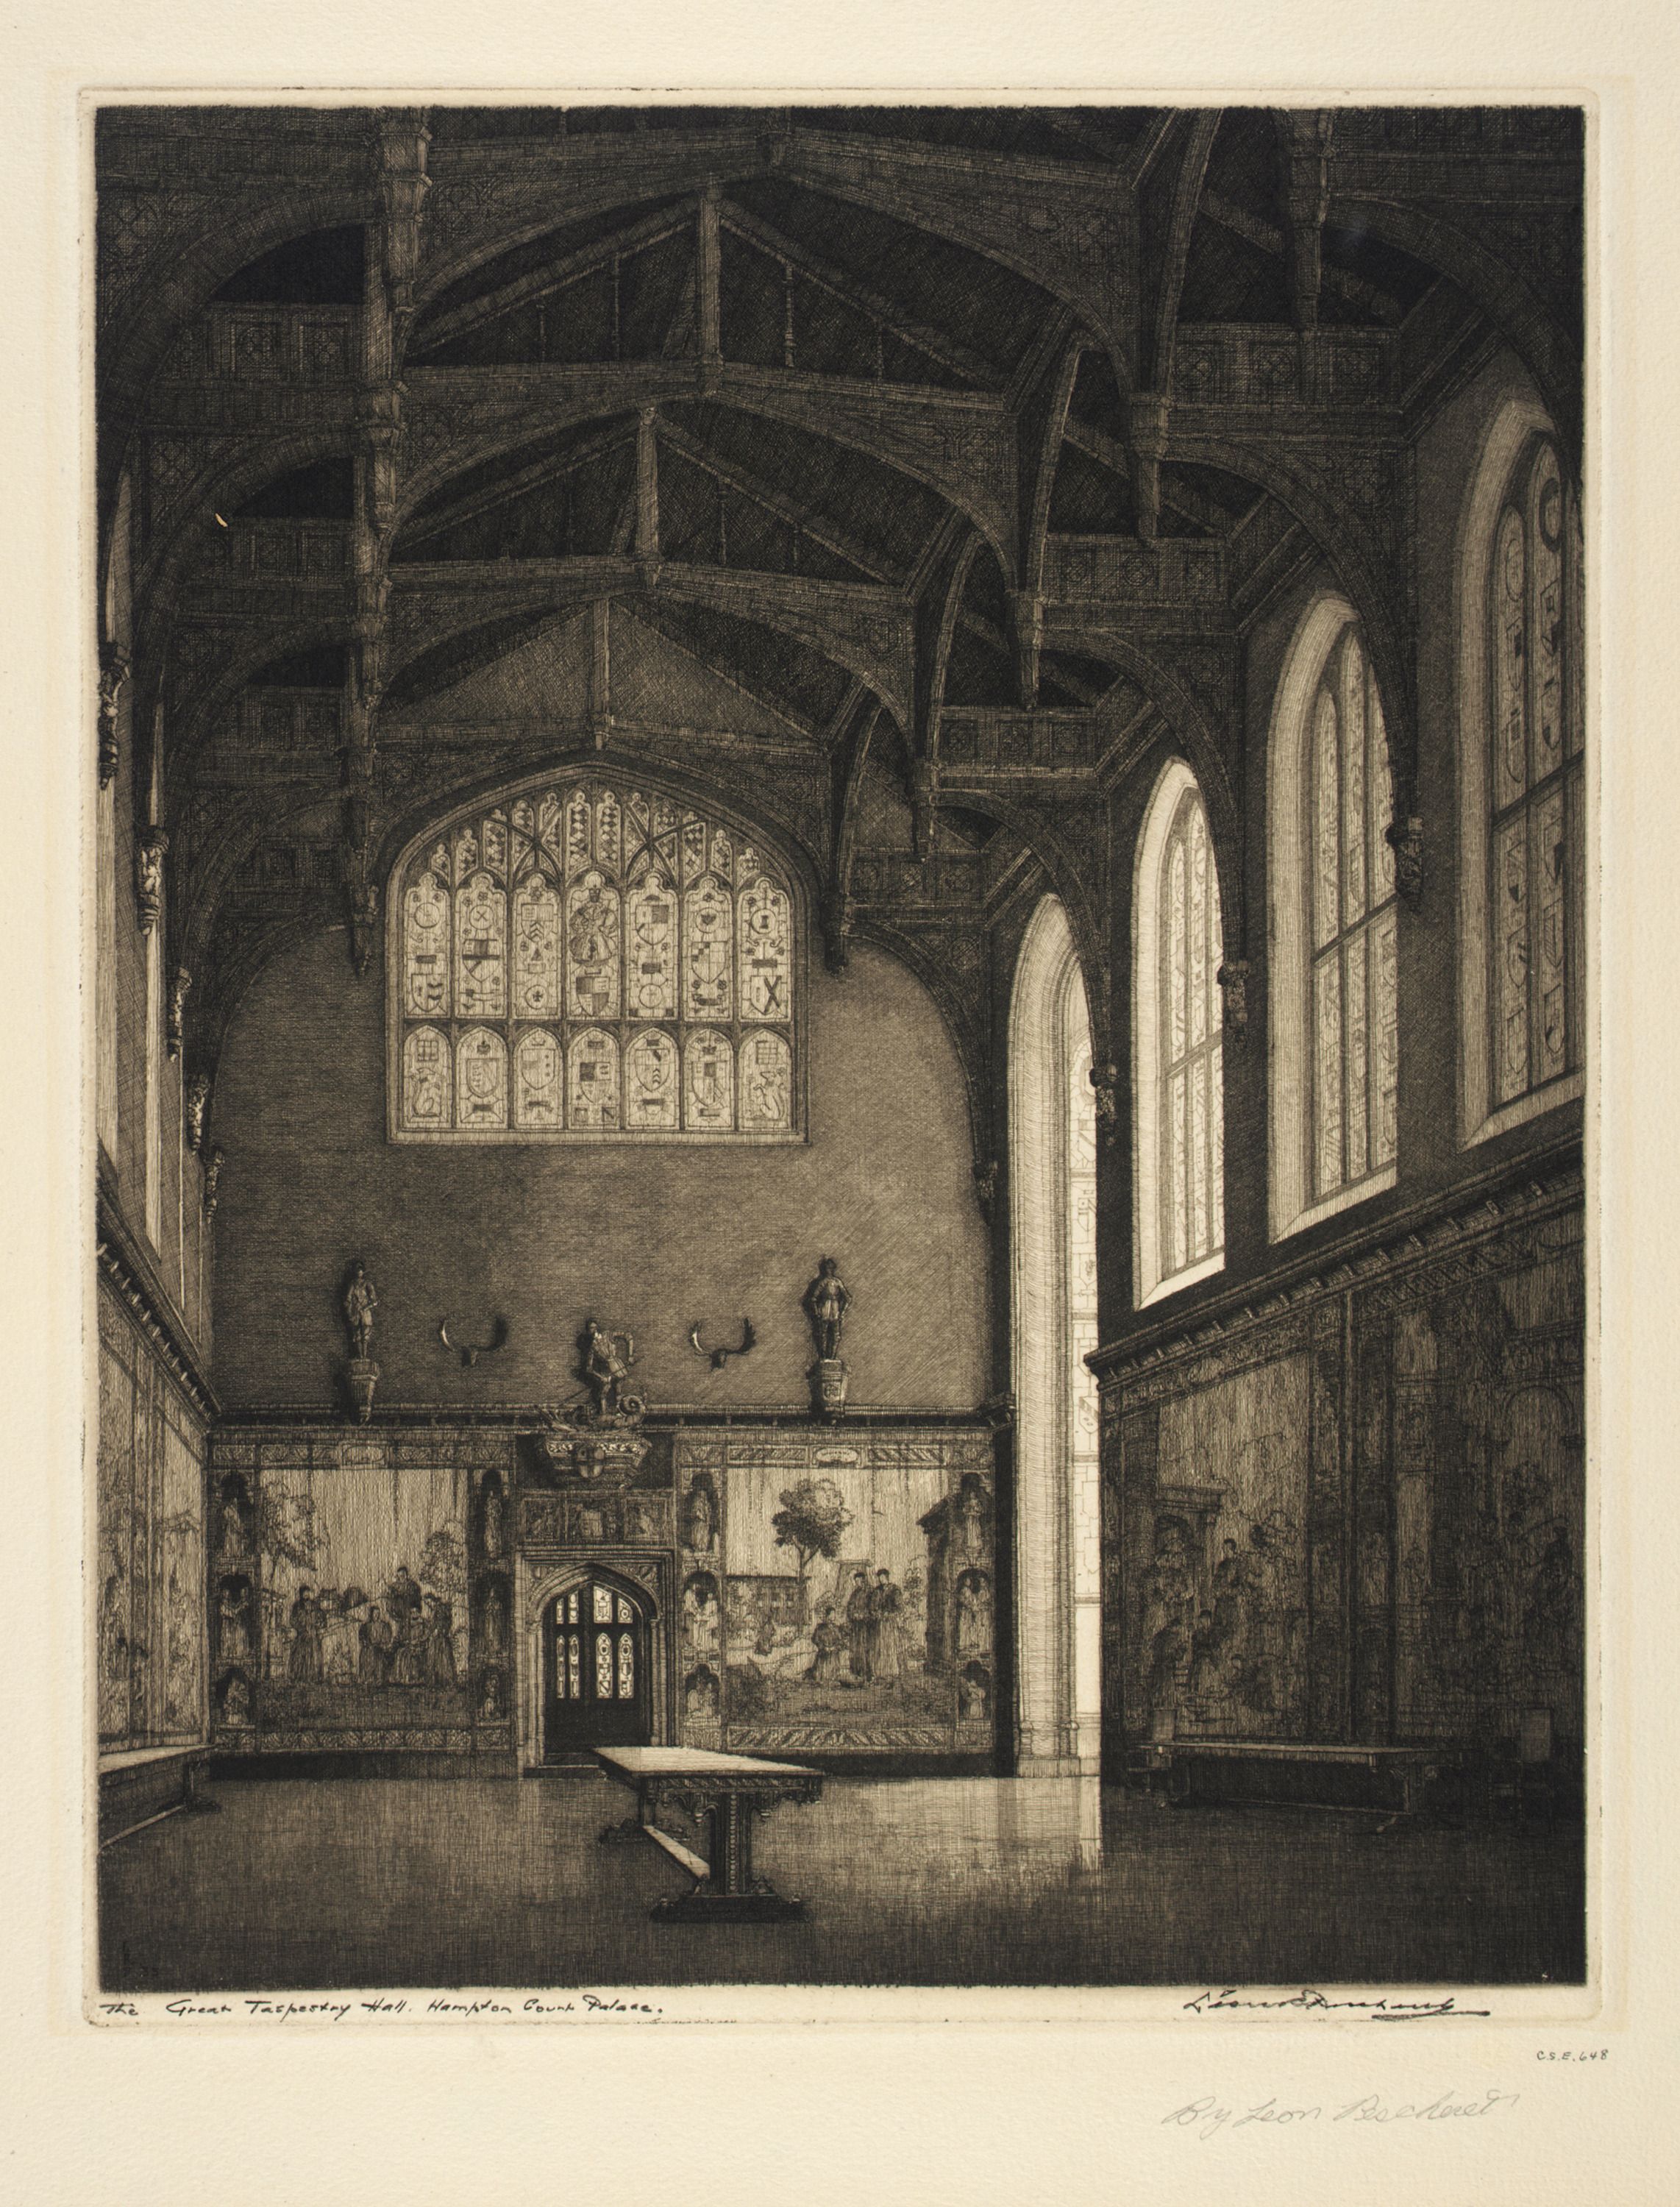 An etching of a tall spare room with long stained-glass windows and a full-height doorway. Around the base of the walls hang tapestries. The floor is empty but for a single bench.